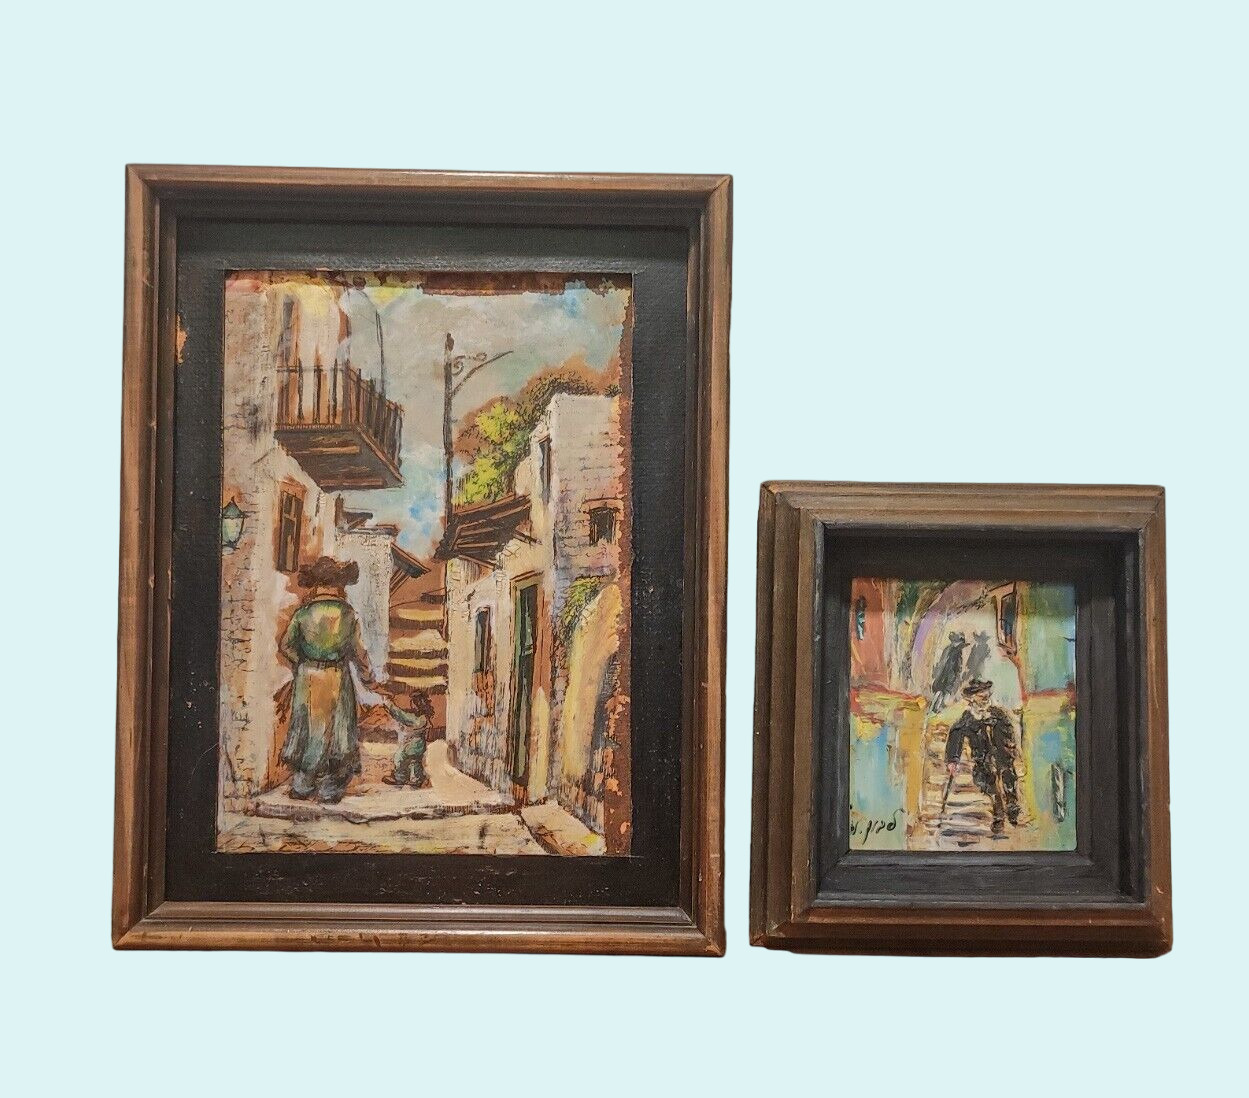 1930s-1940s Judaica Vintage Art, 2 Oil Paintings - Jews in The City of Safed